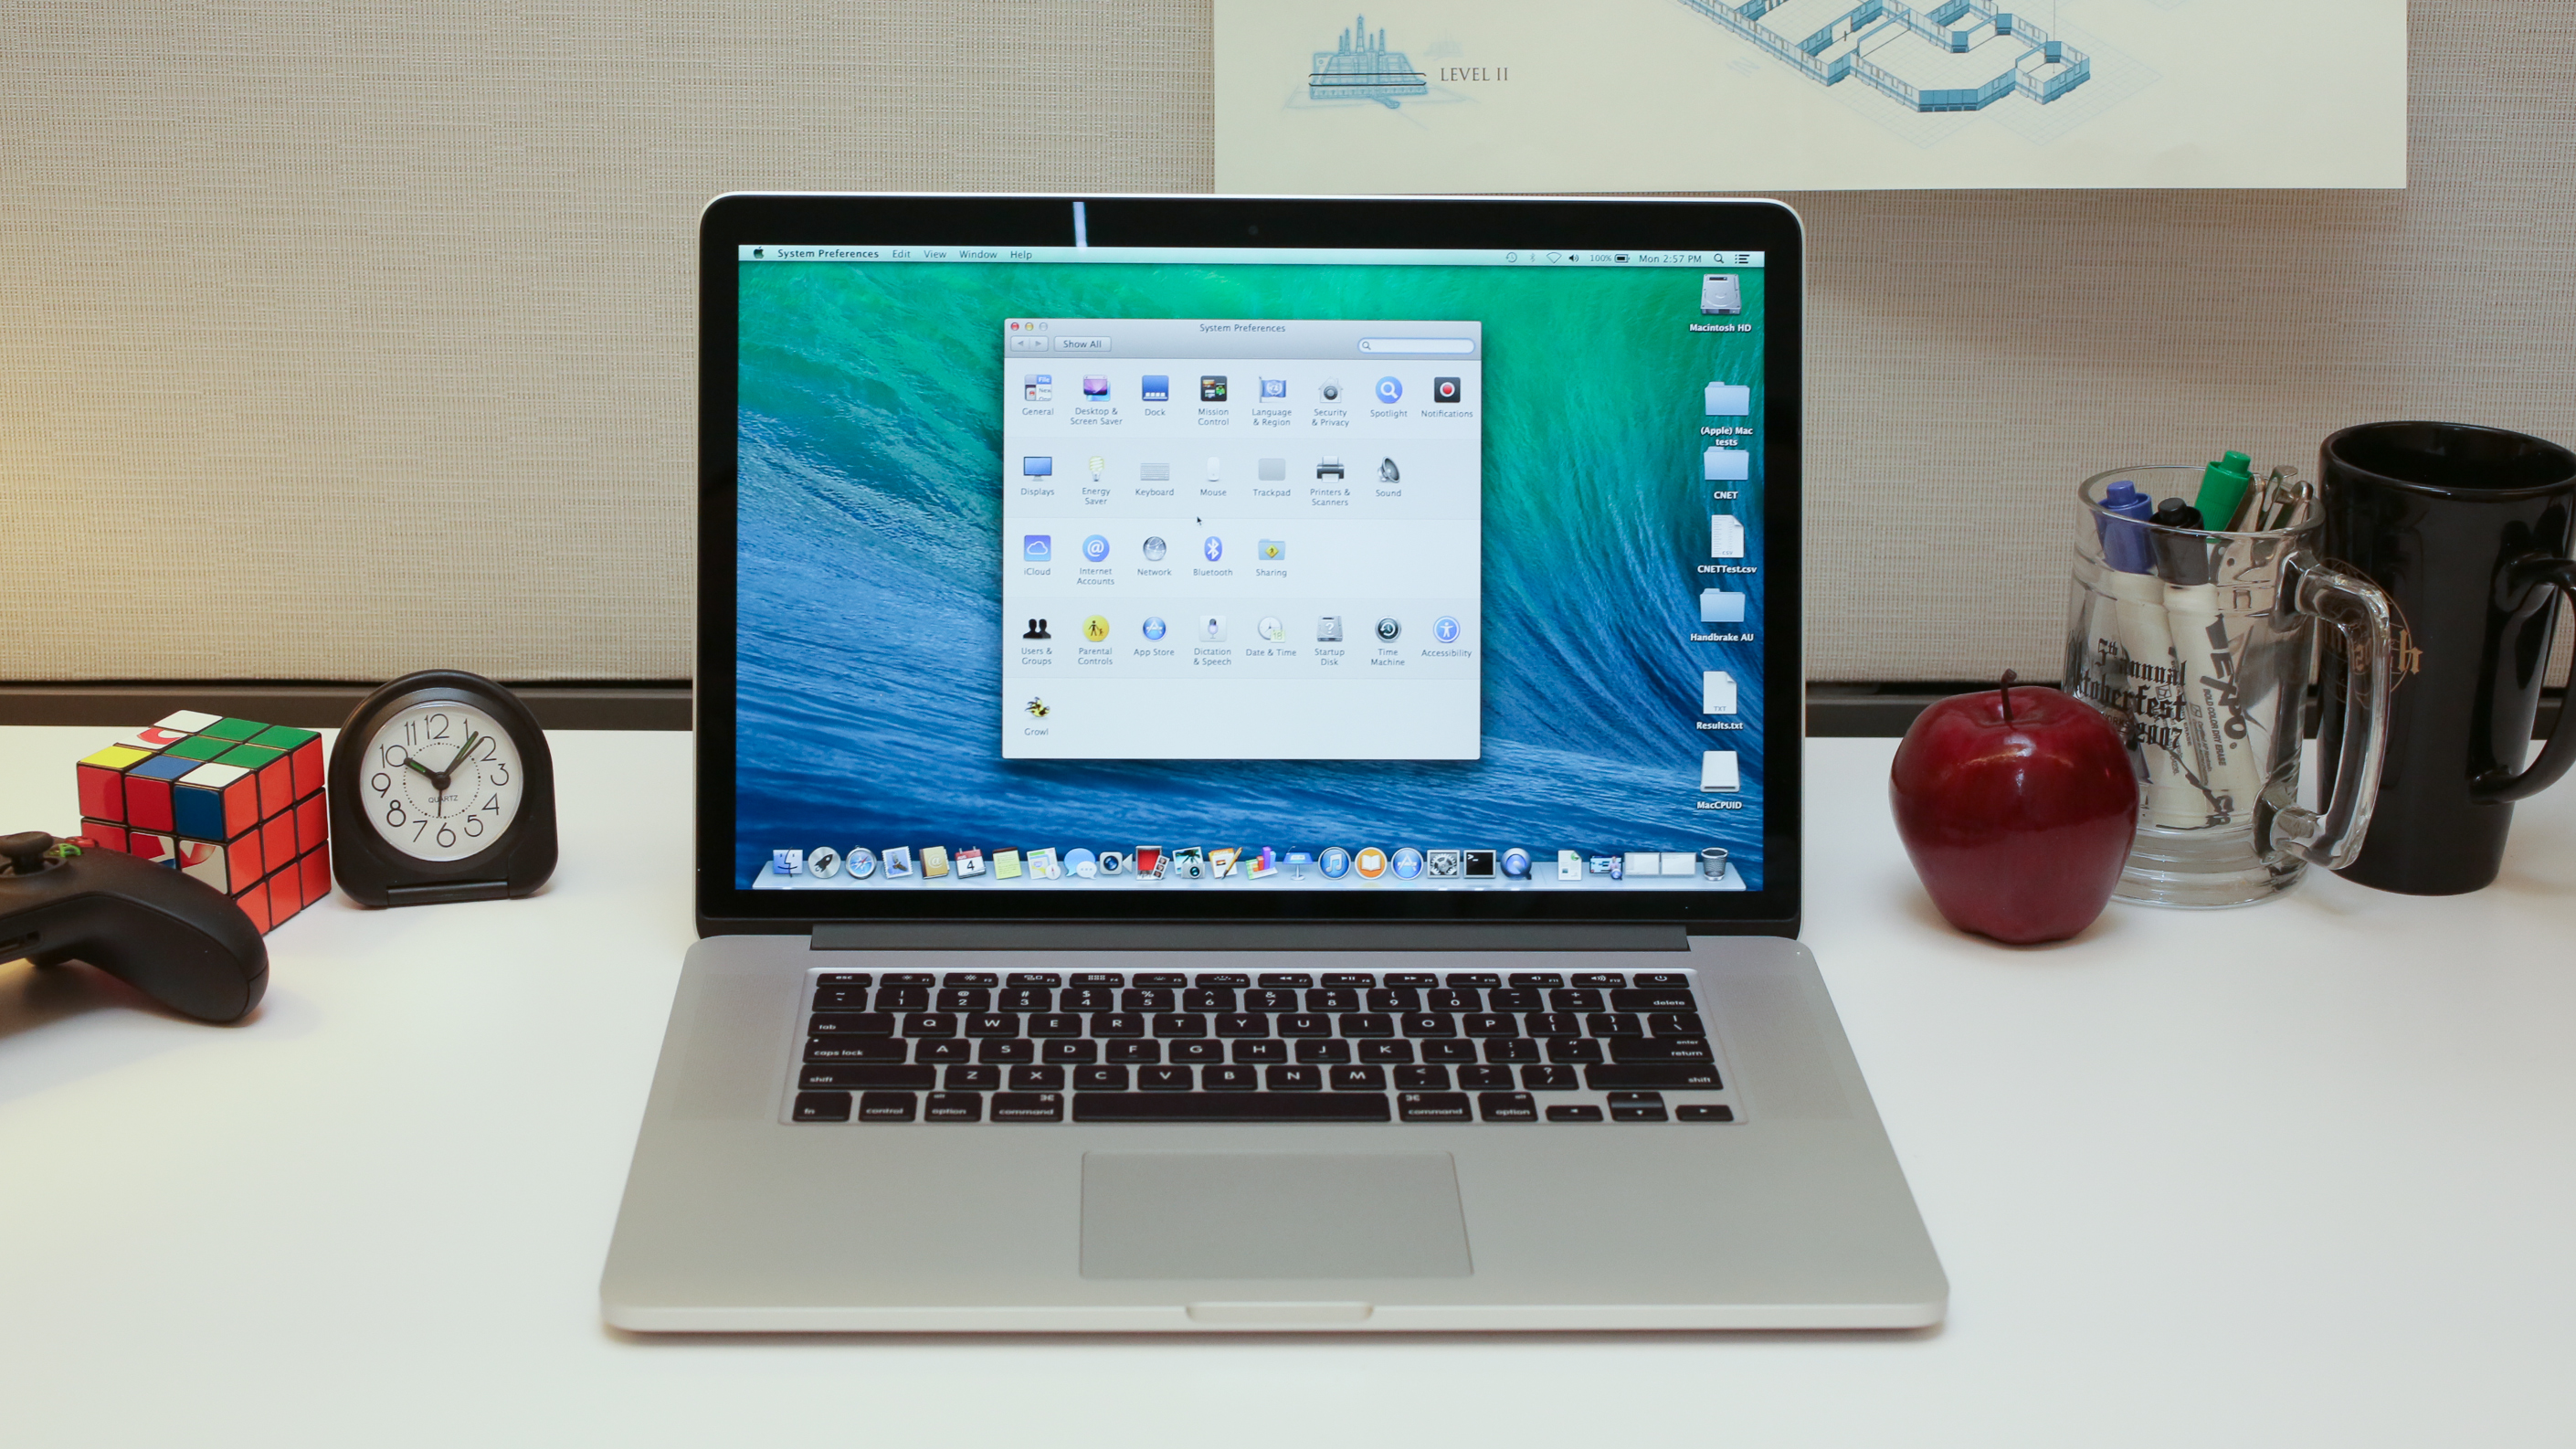 apple-macbook-pro-with-retina-display-15-inch-july-2014-product-photos10.jpg